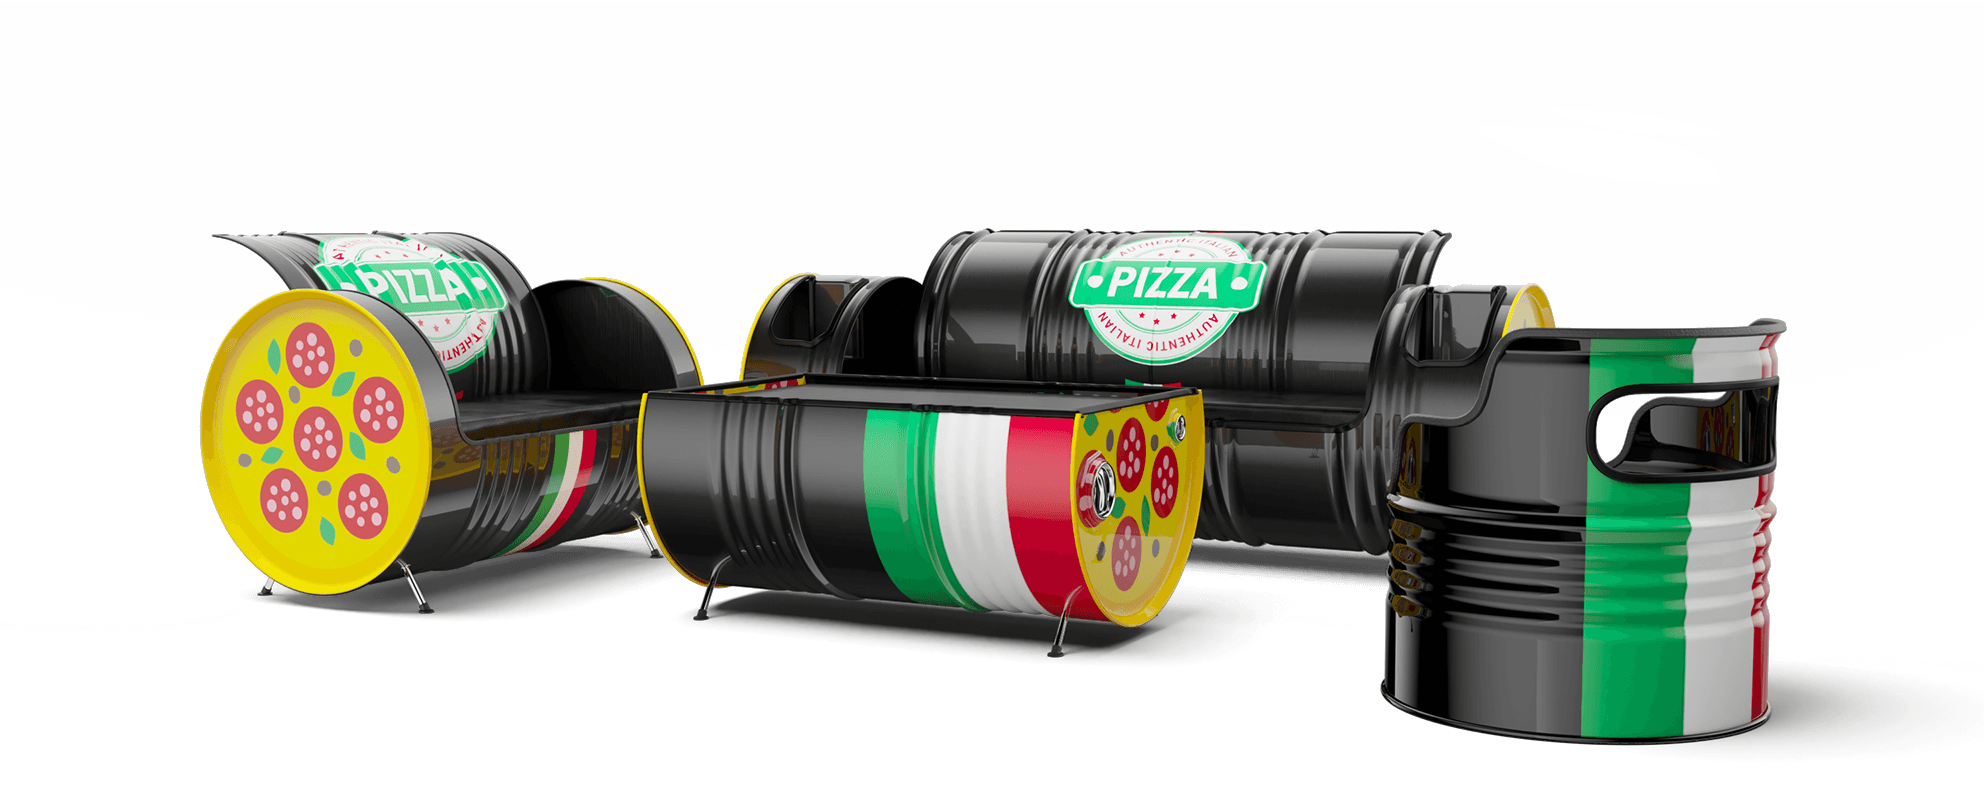 Barrel furnitures - pizza style